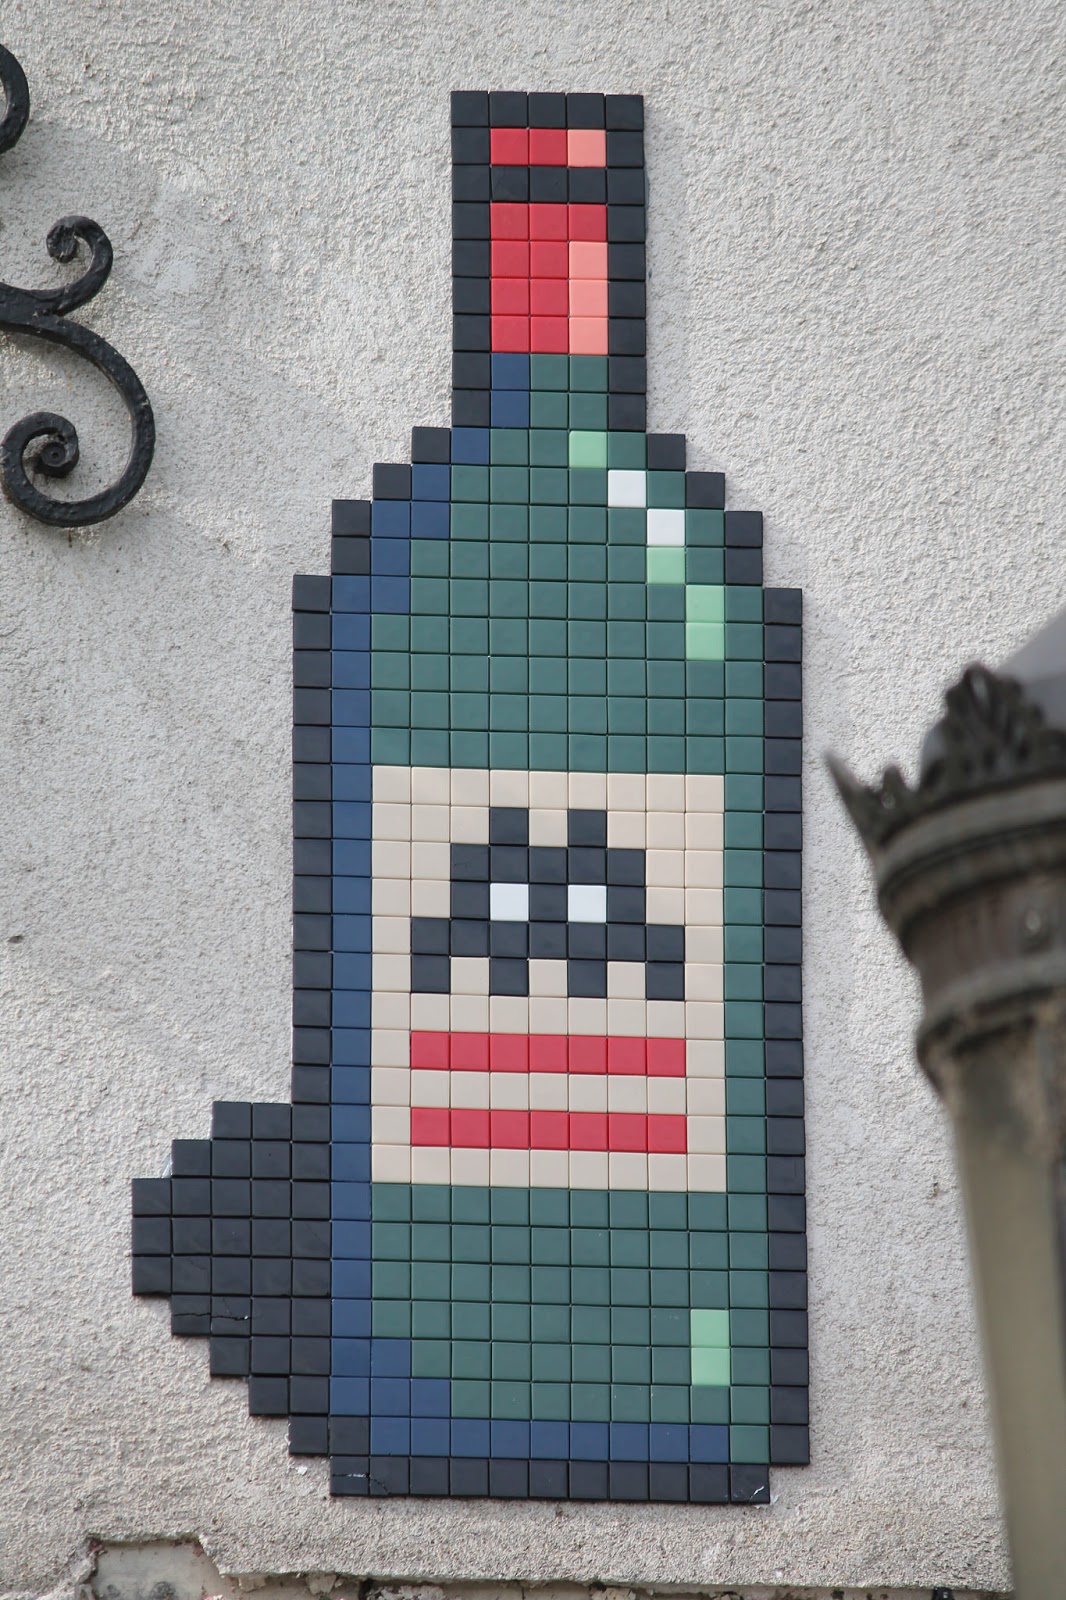 "Air Max Smurf" and more fresh invasions by Invader in Paris, France